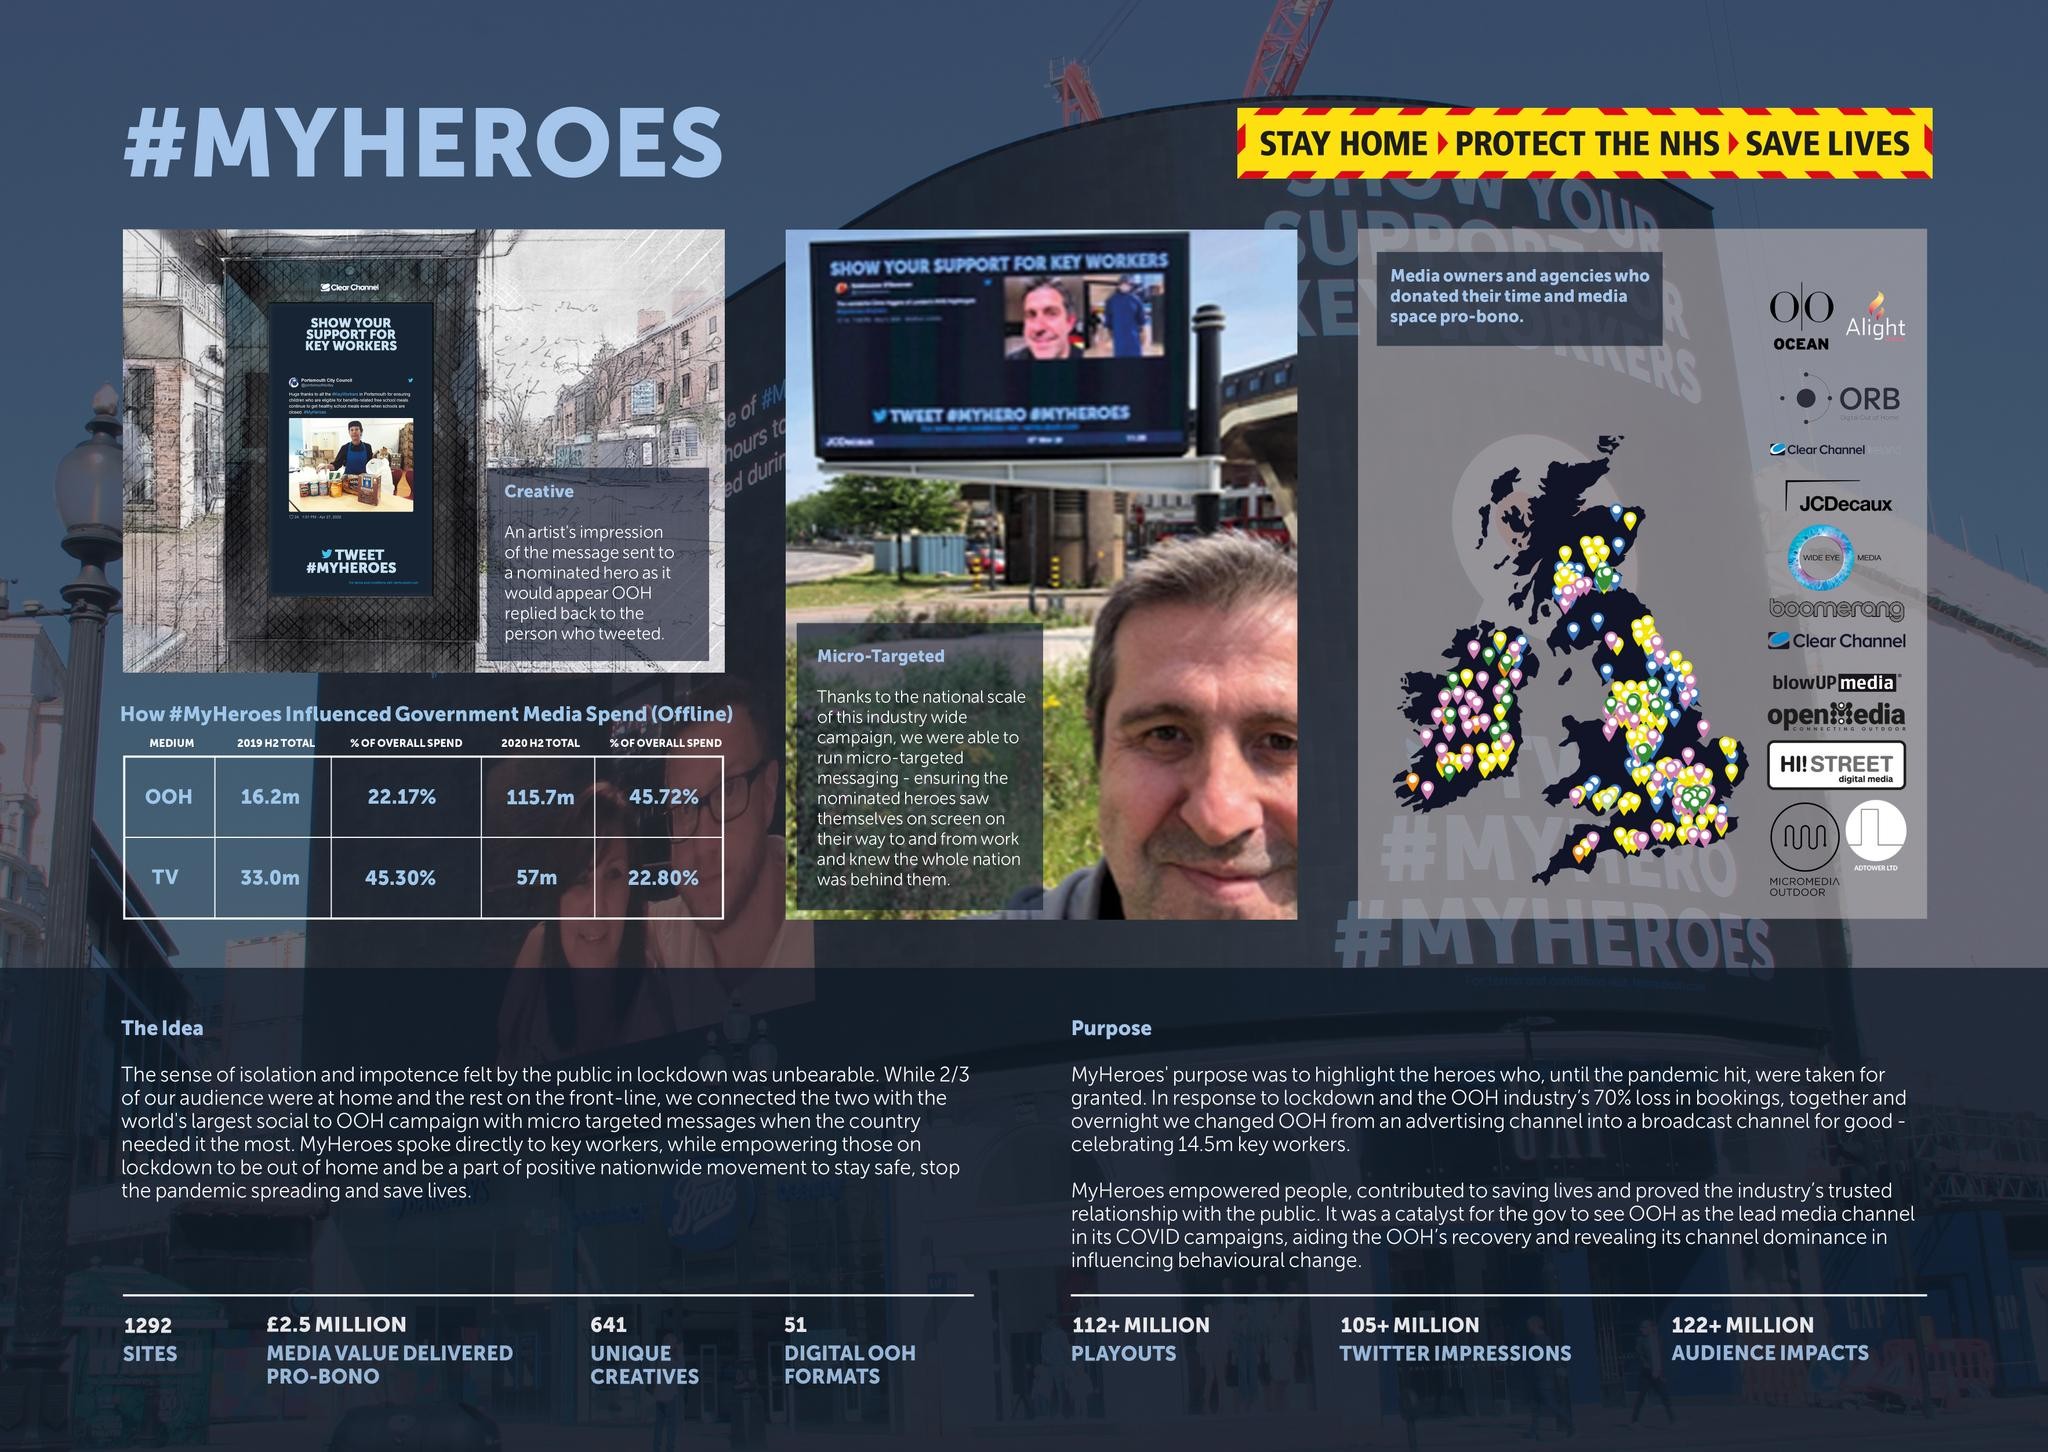 #MyHeroes: International Campaign to Celebrate Key Workers During the Pandemic